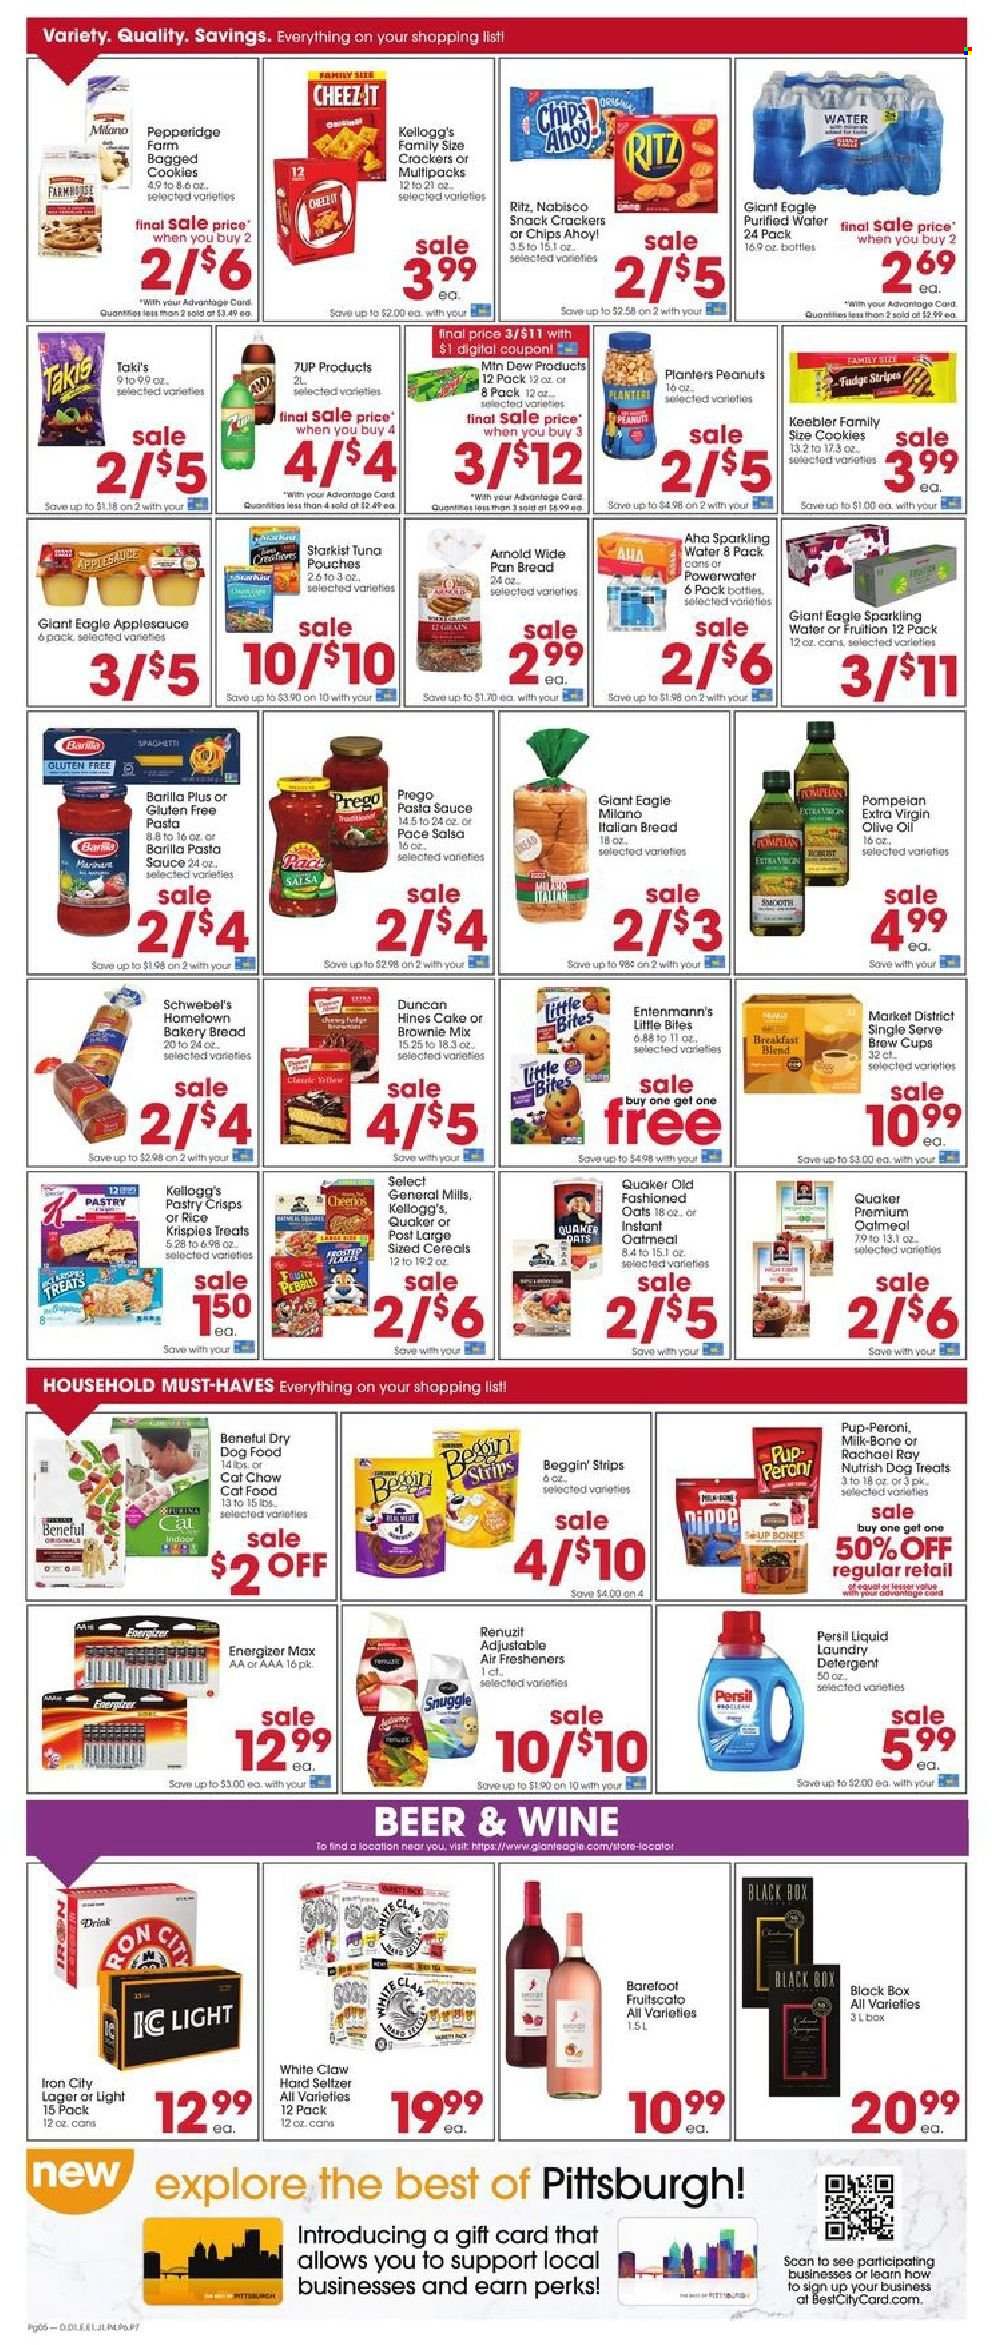 thumbnail - Giant Eagle Flyer - 09/16/2021 - 09/22/2021 - Sales products - bread, cake, Entenmann's, brownie mix, StarKist, pasta sauce, sauce, Barilla, Quaker, strips, cookies, snack, crackers, Kellogg's, Chips Ahoy!, Little Bites, Keebler, RITZ, chips, Cheez-It, oatmeal, cereals, Rice Krispies, salsa, extra virgin olive oil, olive oil, oil, apple sauce, peanuts, Planters, Mountain Dew, 7UP, sparkling water, purified water, breakfast blend, Fruitscato, Ron Pelicano, White Claw, Hard Seltzer, beer, Lager, detergent, Snuggle, Persil, laundry detergent, pan, cup, Renuzit, air freshener, Energizer, animal food, cat food, dog food, dry dog food, Pup-Peroni, Beggin', Nutrish. Page 4.